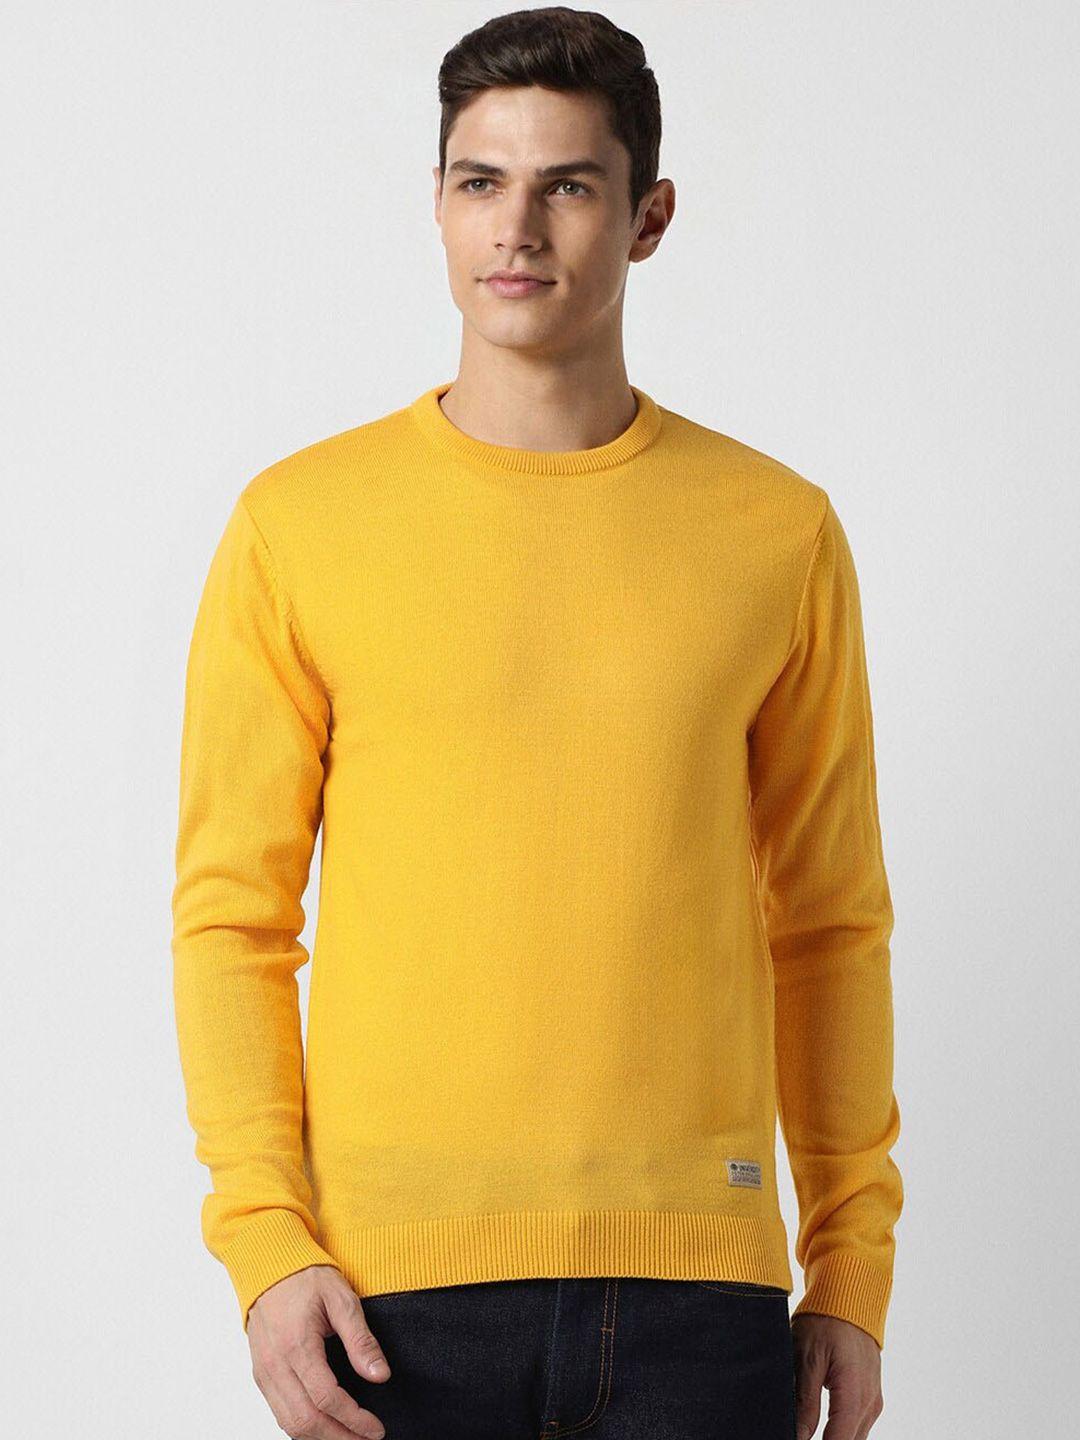 peter england university acrylic pullover sweaters